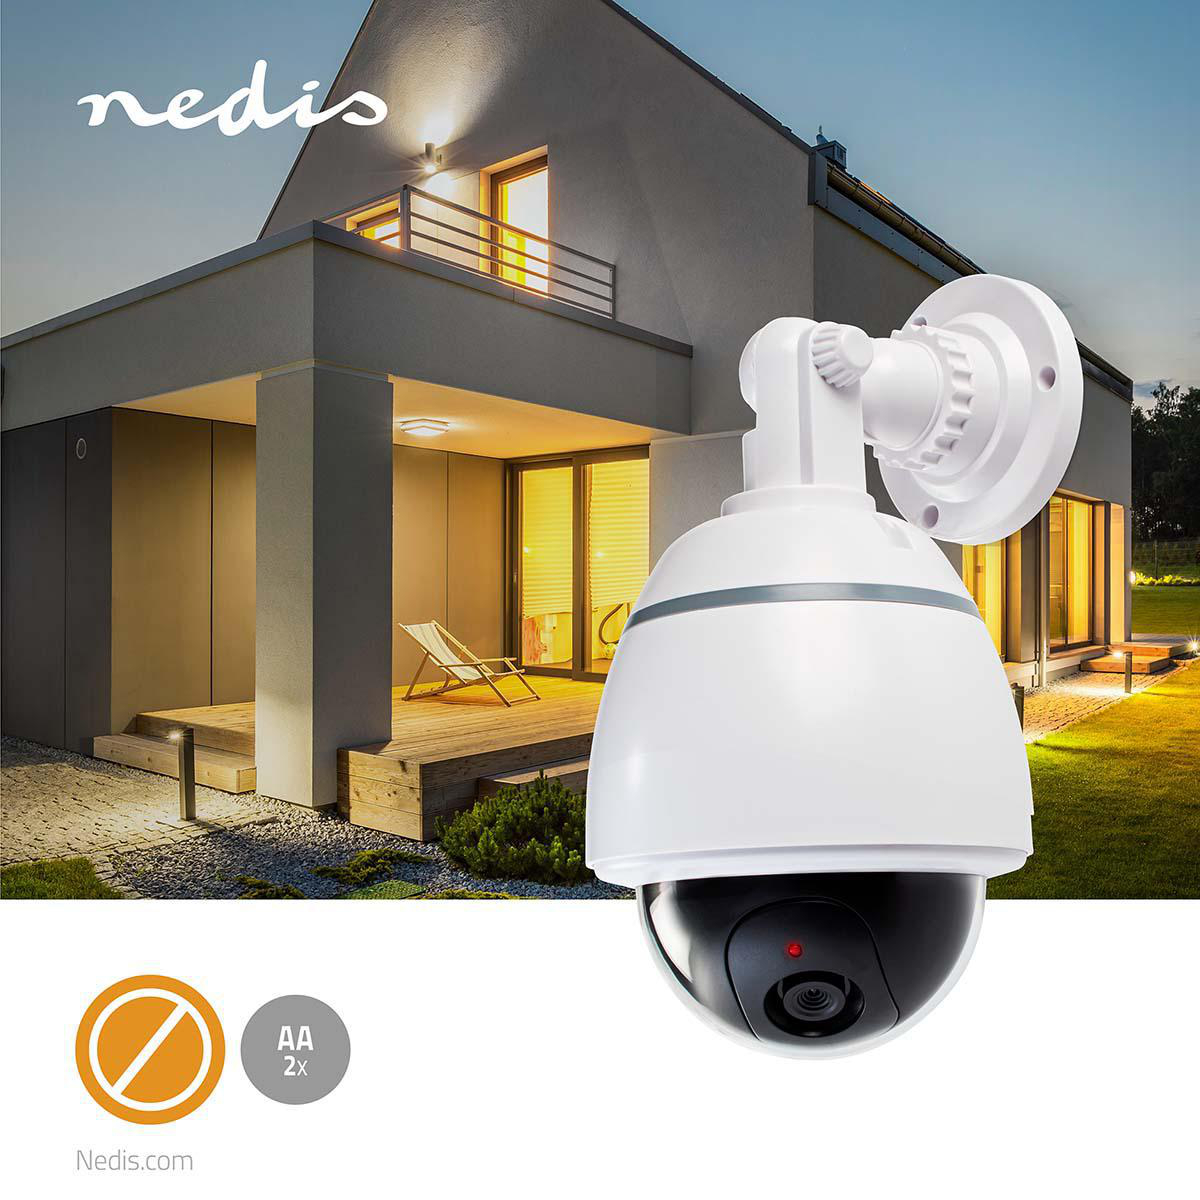 Dummy Security Camera | Dome | Battery Powered | Indoor | White